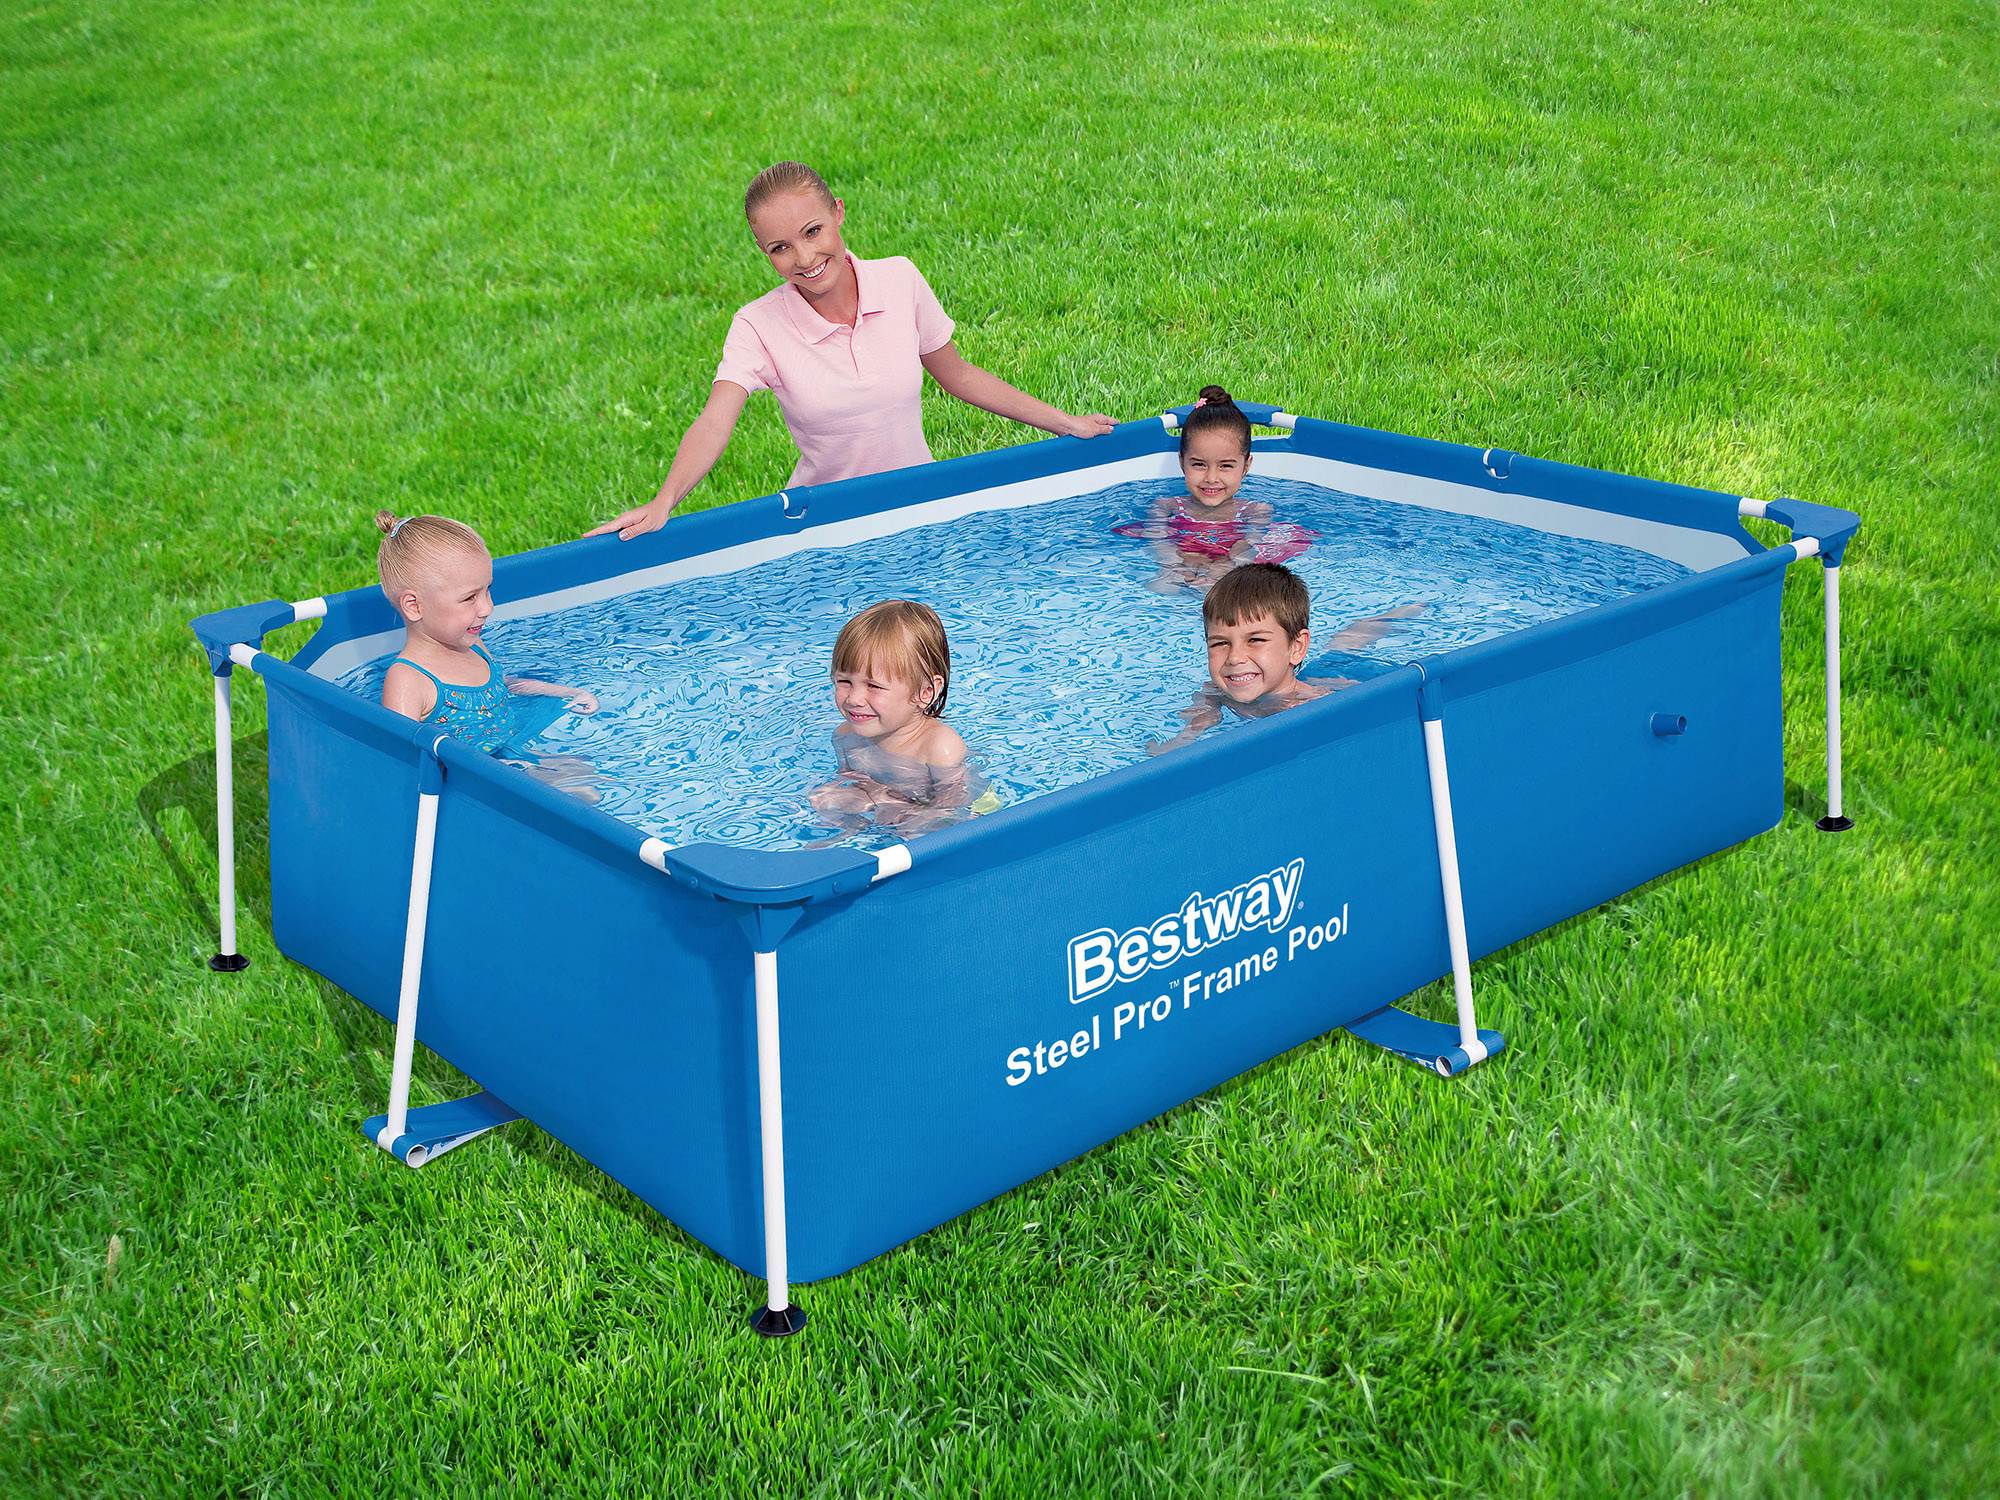 Frame Splash the at Pools in x Bestway Above-Ground Metal Frame Above-Ground department Rectangle 26-in 10-ft 6.5-ft x Pool